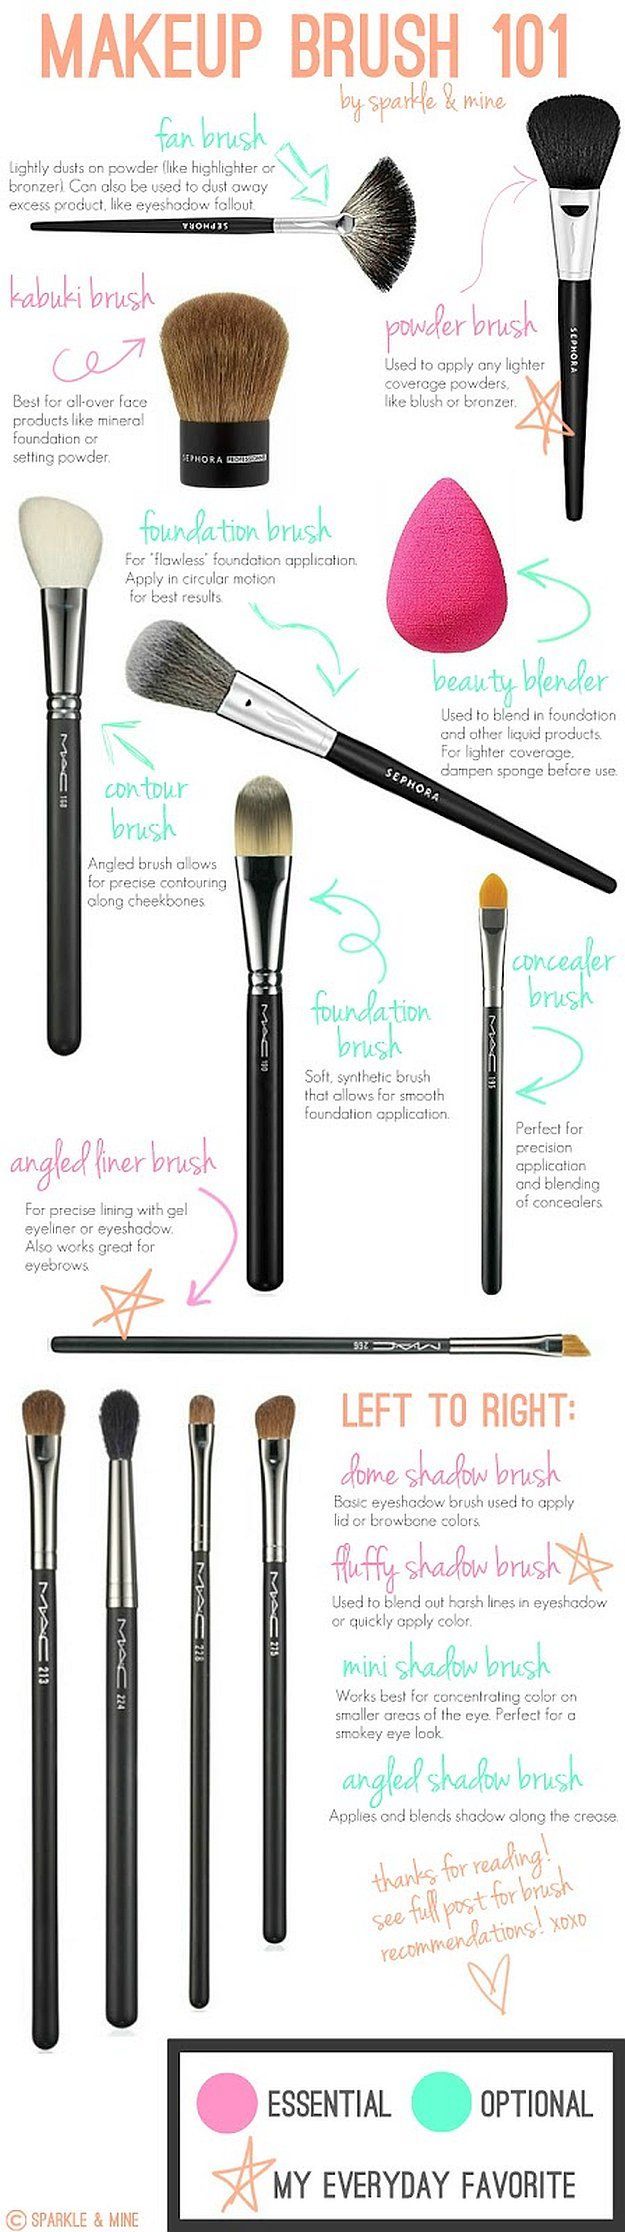 Which Makeup Brushes are Essential & How to Care for Them, check it out at makeu...